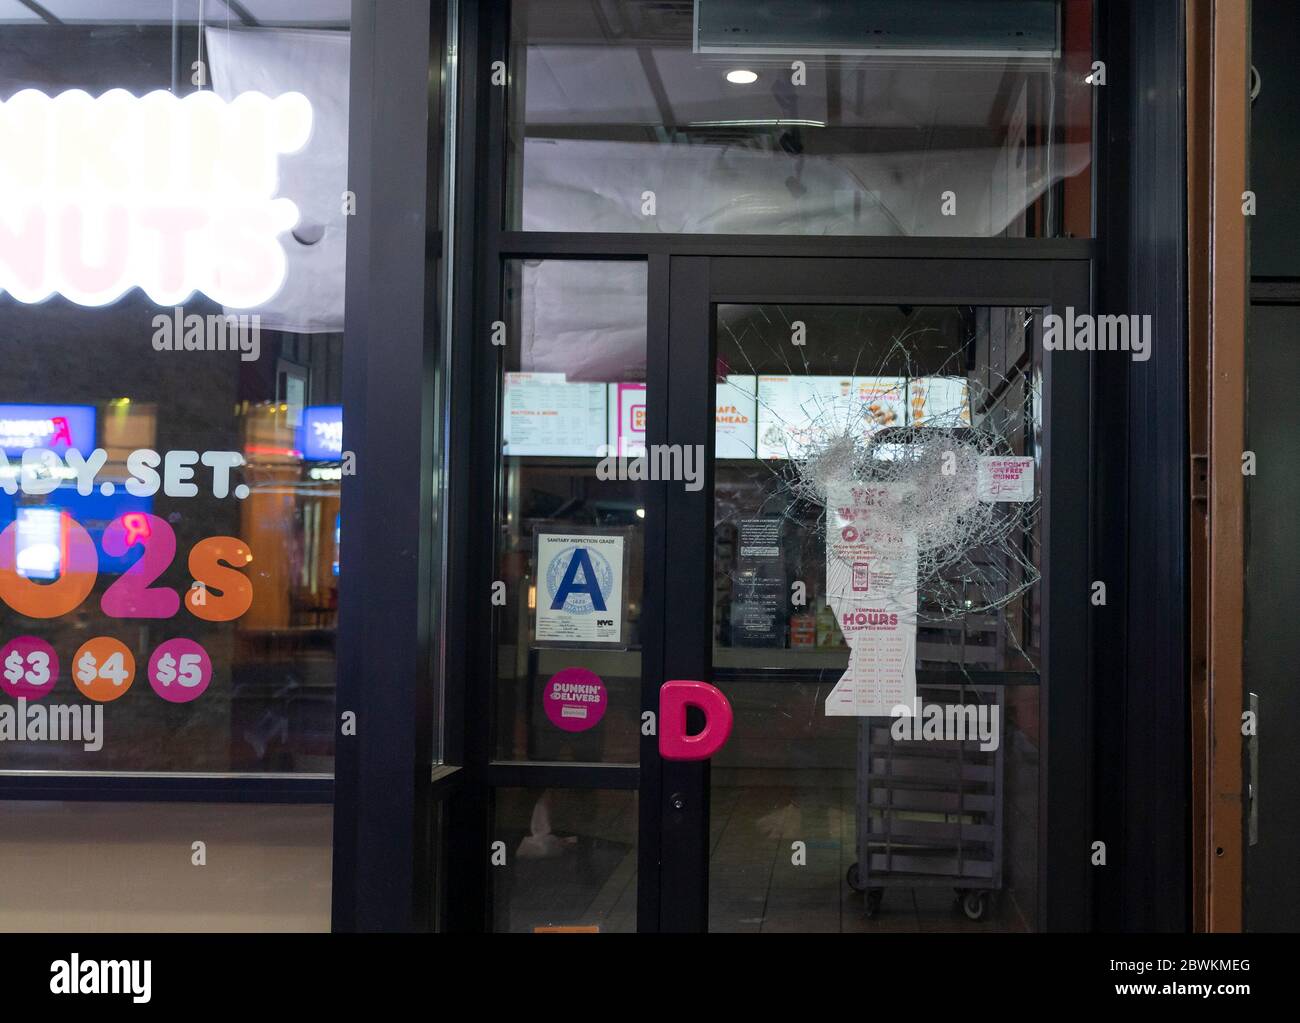 New York, United States. 01st June, 2020. Protests turn into looting and destructions in Manhattan before first curfew imposed. View of Dunkin Donuts store broken windows. (Photo by Lev Radin/Pacific Press) Credit: Pacific Press Agency/Alamy Live News Stock Photo